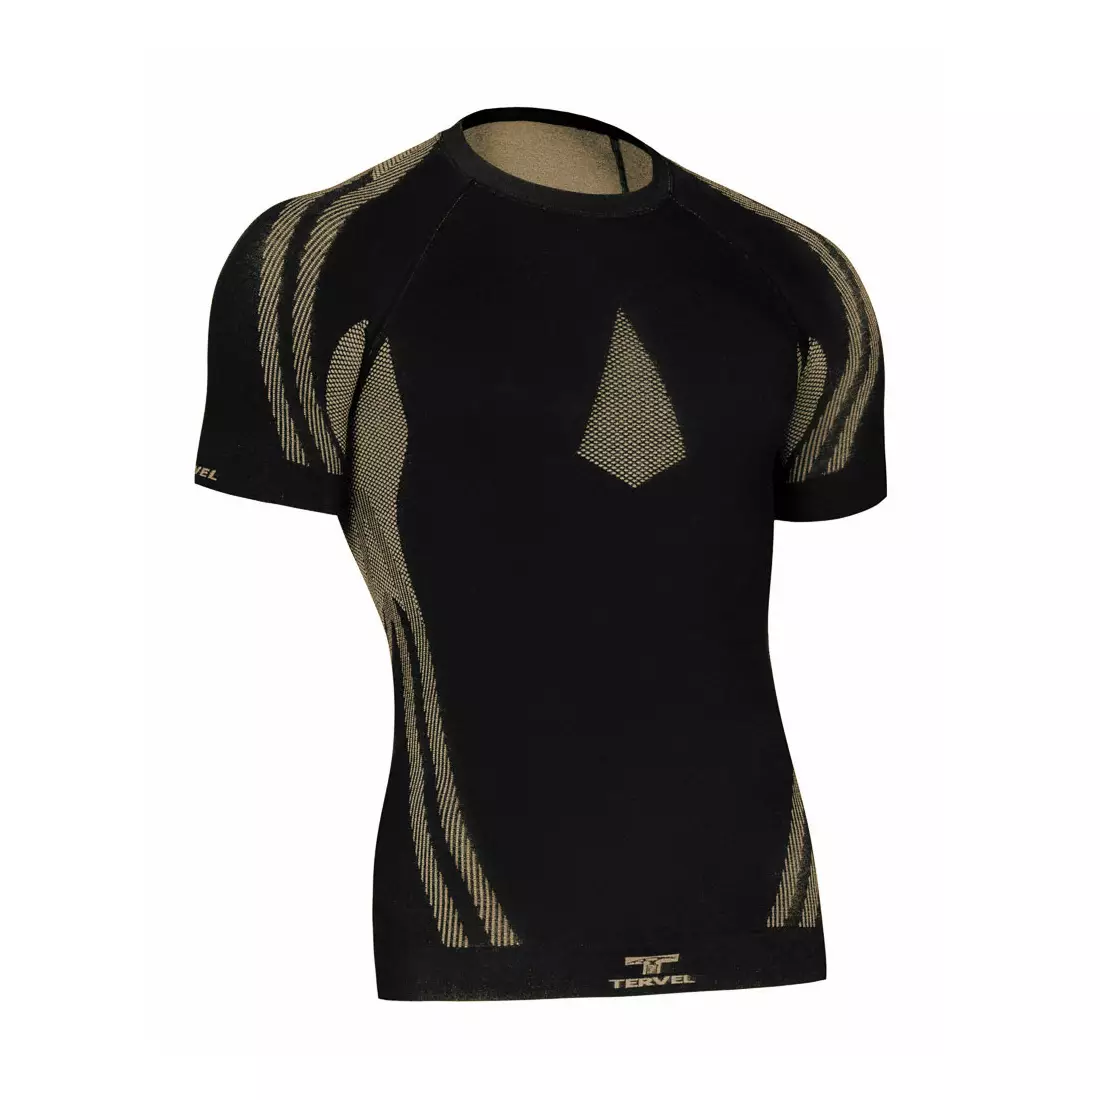 TERVEL OPTILINE LIGHT MOD-02 - men's thermal T-shirt with short sleeves, color: Black and gold